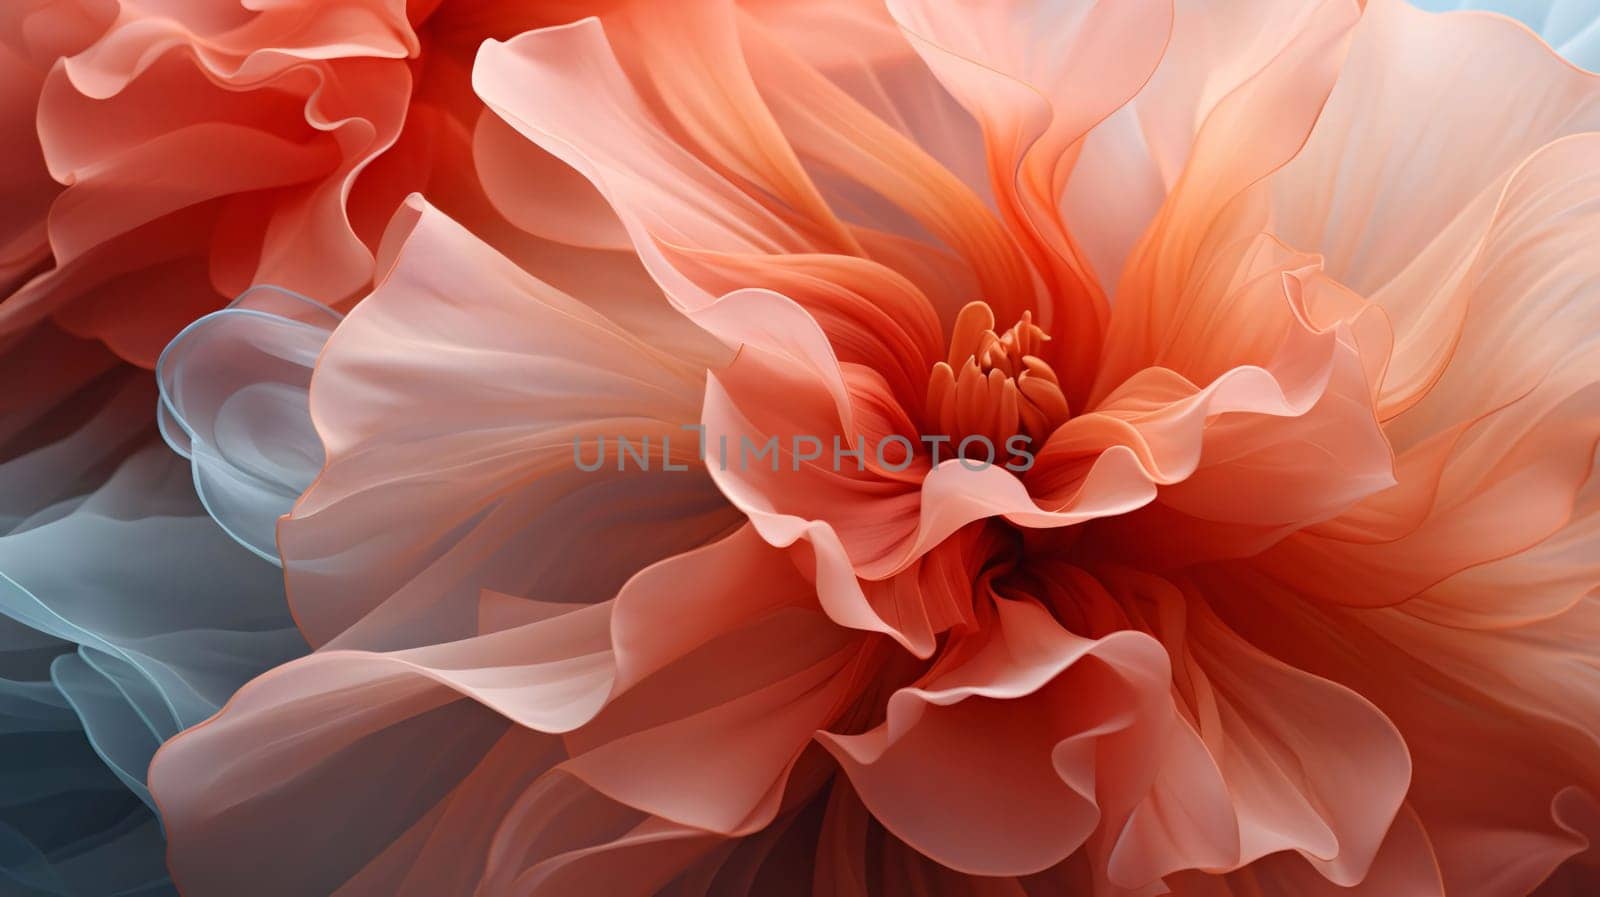 Close-up on orange red, petals of a flower. Flowering flowers, a symbol of spring, new life. A joyful time of nature waking up to life.